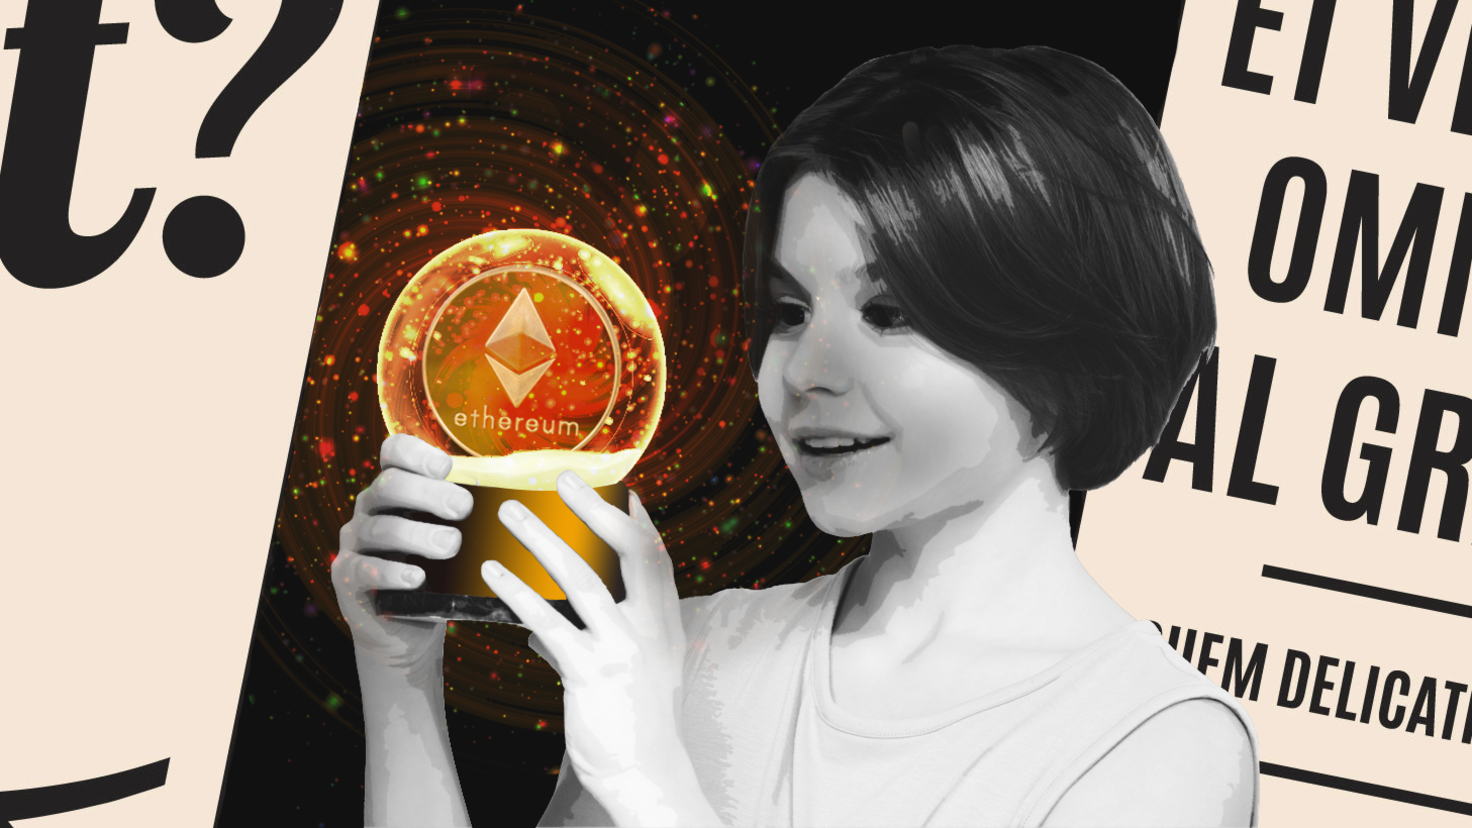 Collage-style image of a young girl holding a mounted ETH coin aloft